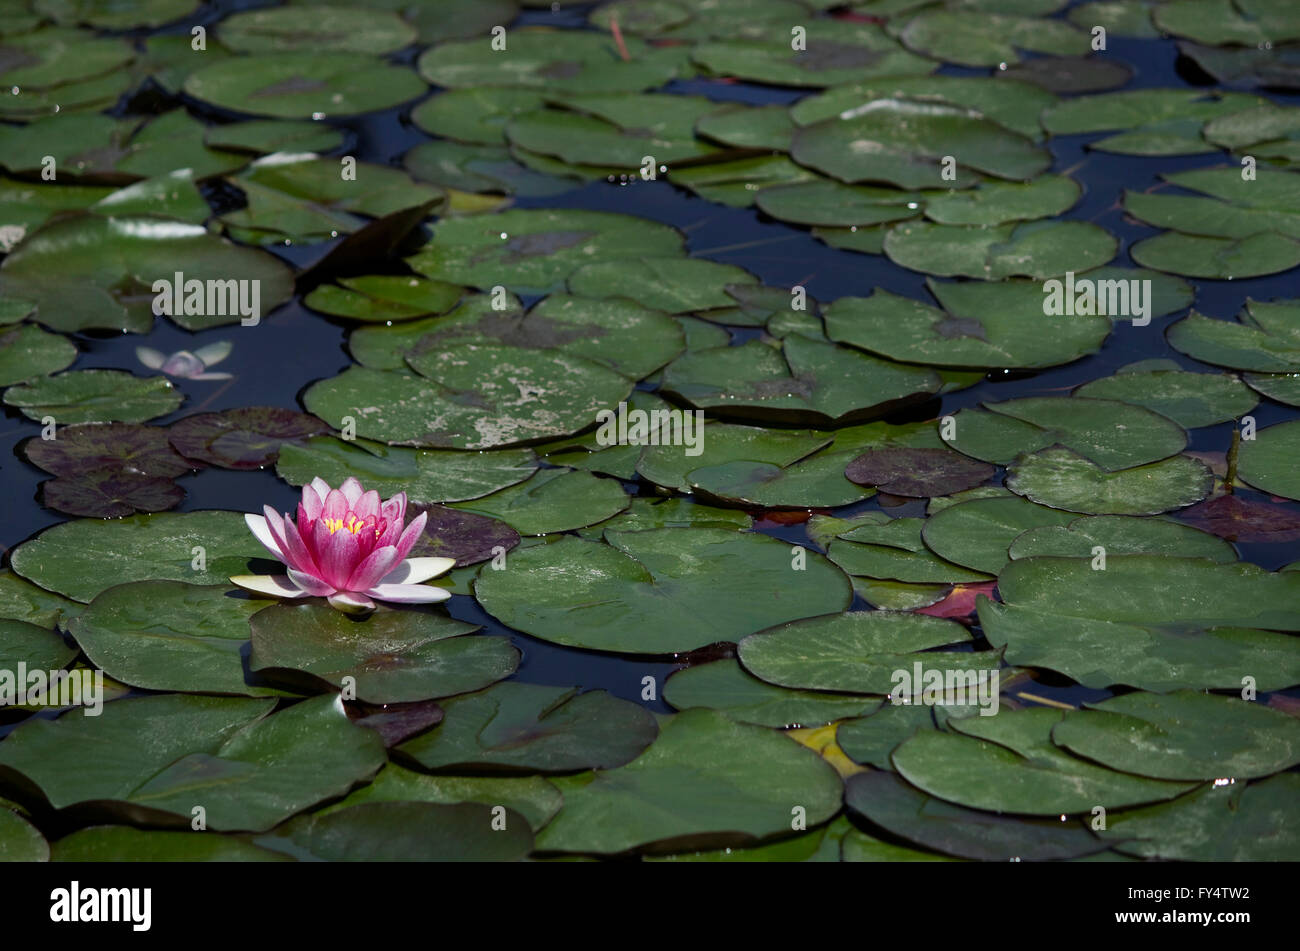 Spiritual violet-colored water lily (waterlily) aquatic ornamental herb blossom surrounded by floating lily pads. Stock Photo